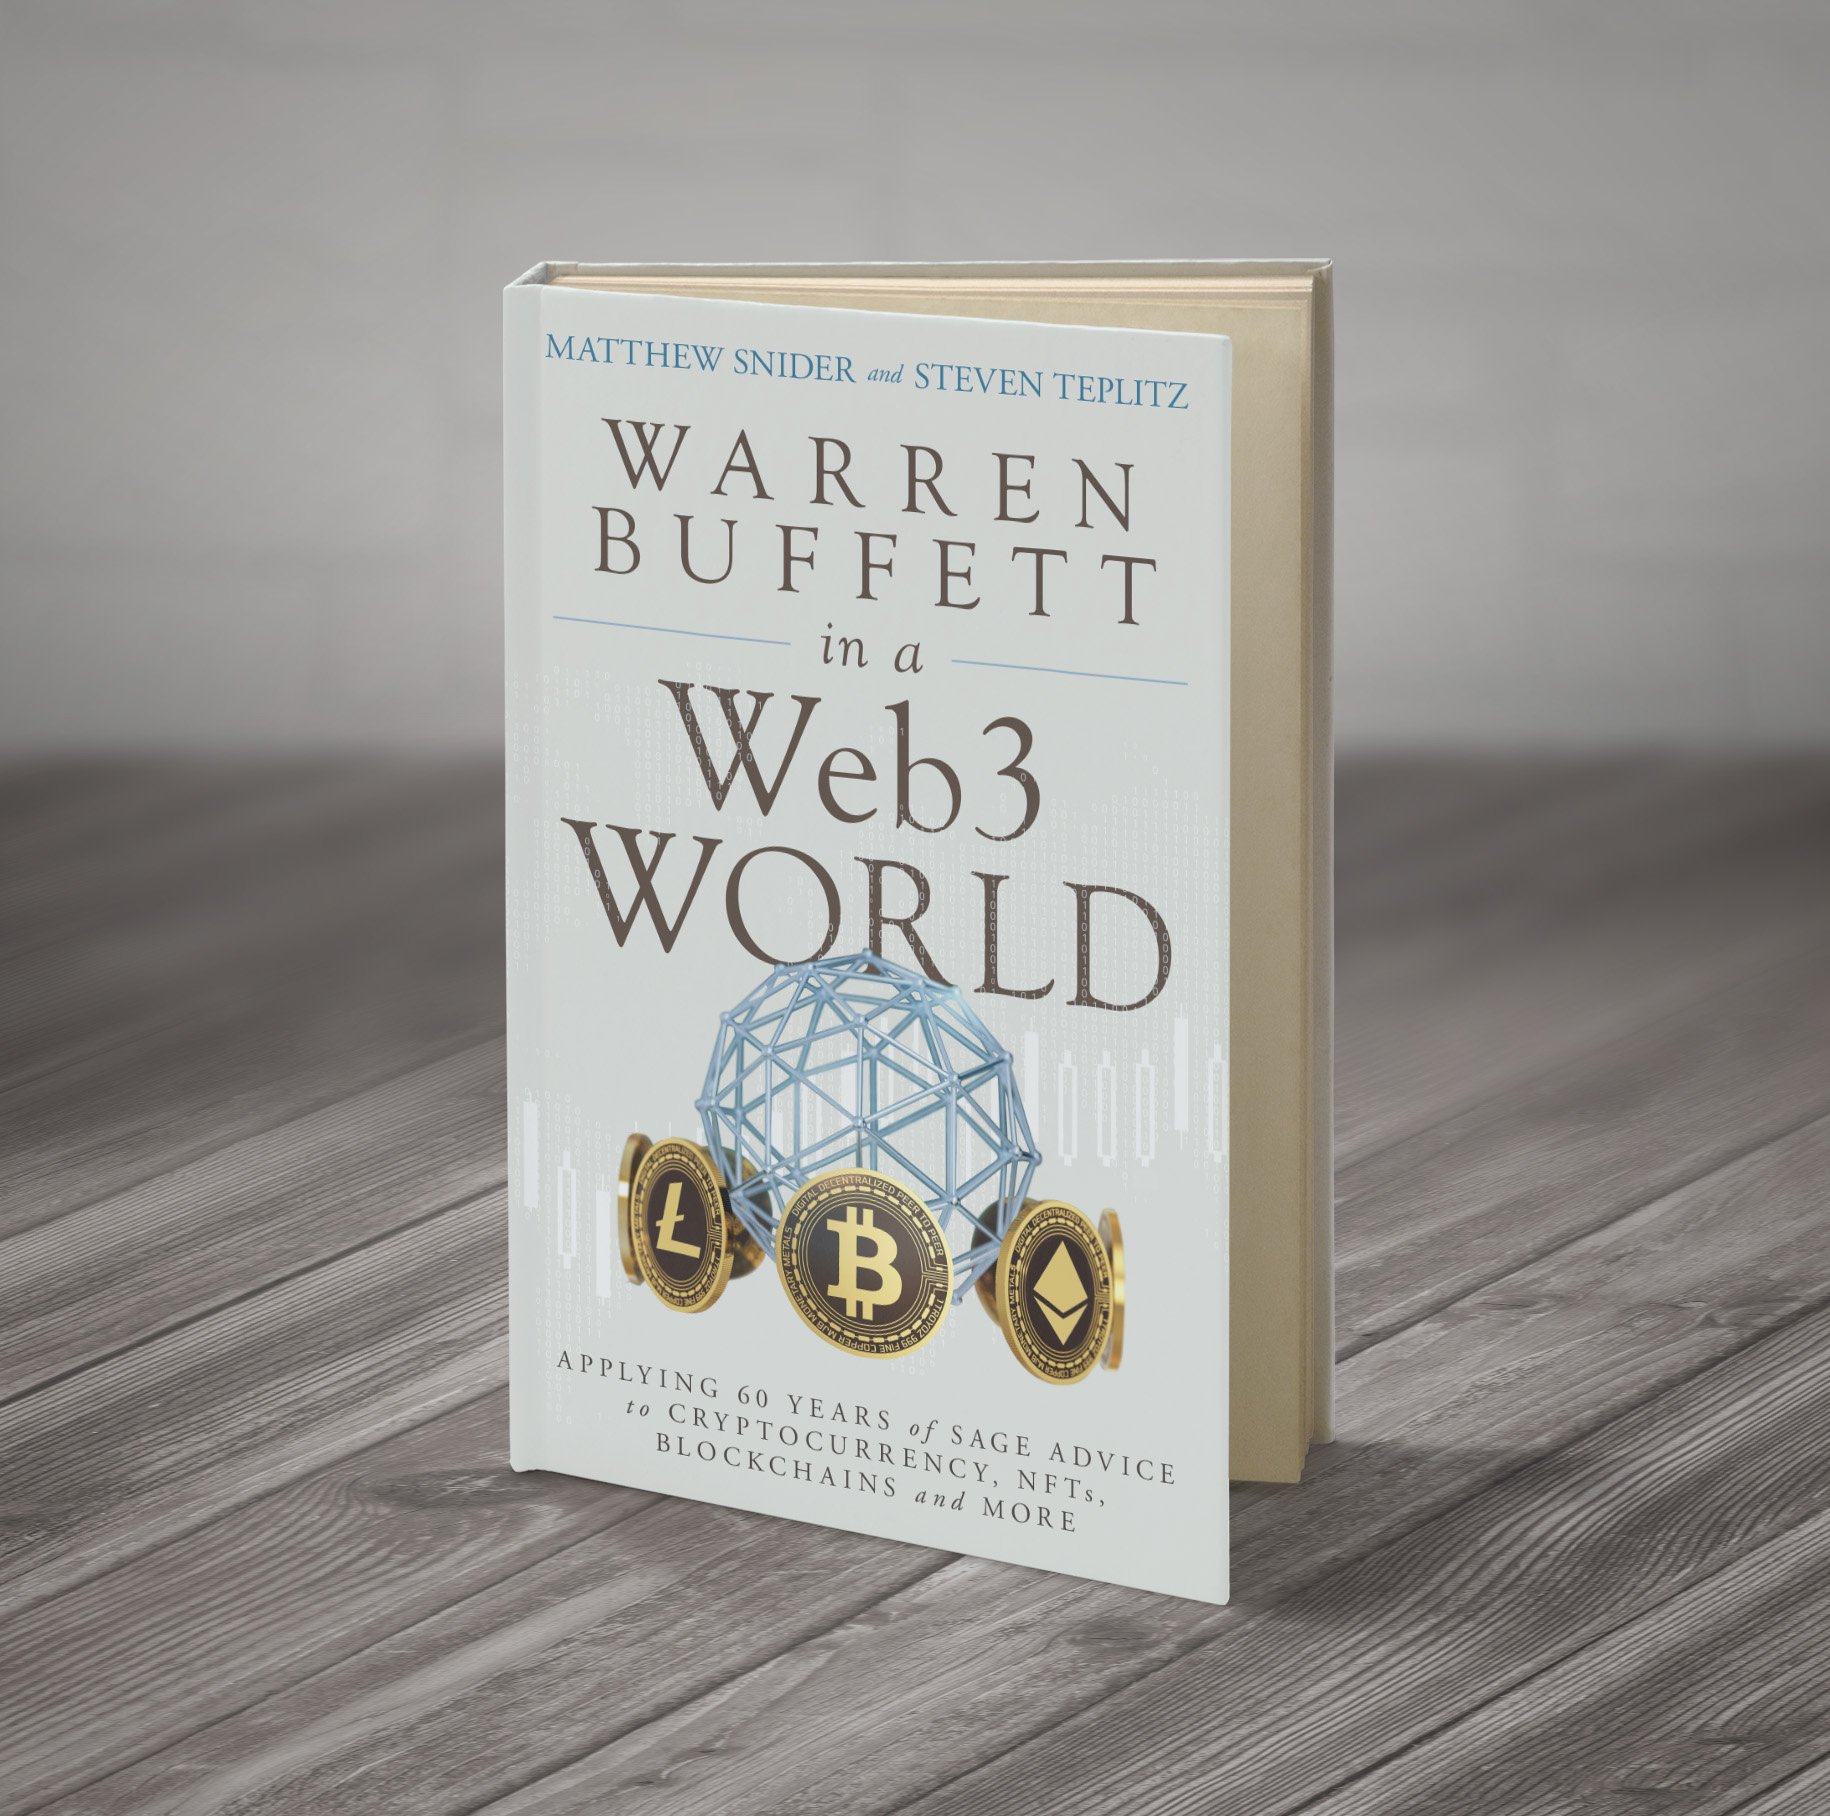 Learn how to invest in web3 with our snackable investment guide: WARREN BUFFETT in a Web3 WORLD: APPLYING 60 YEARS of SAGE ADVICE to CRYPTOCURRENCY, NFTs, BLOCKCHAINS and MORE 